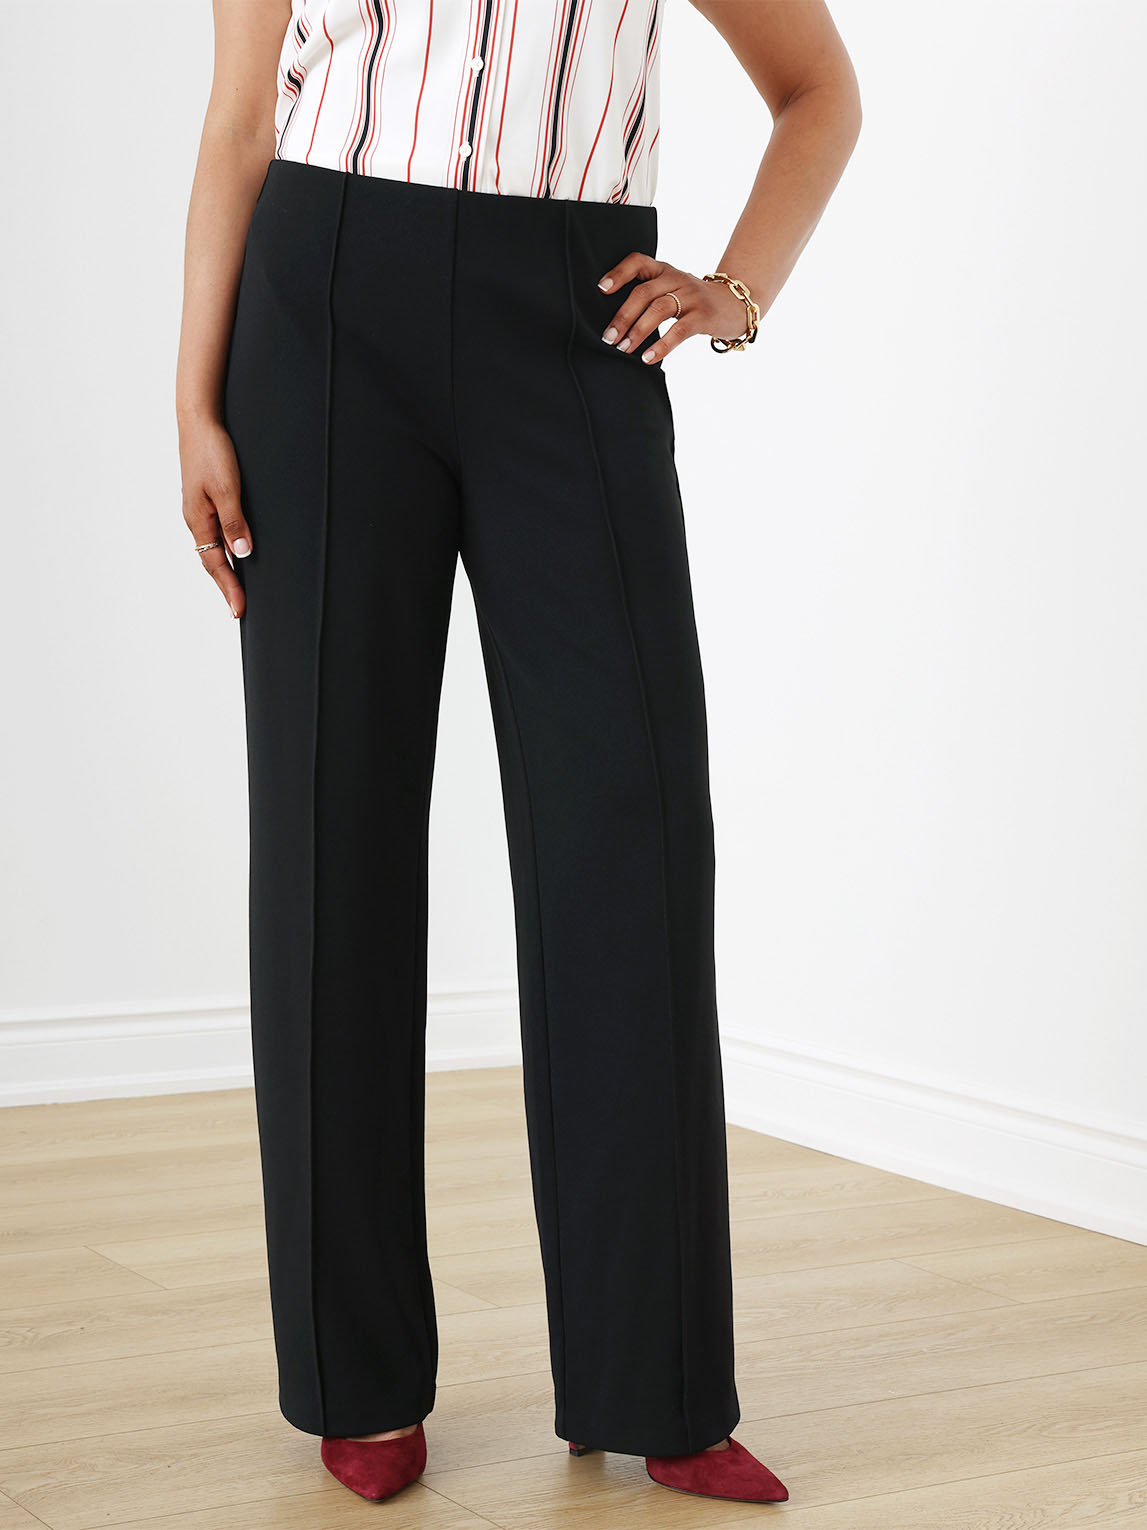 Express High Waisted Pleated Wide Leg Pant  Wide leg pants, Womens black  dress pants, High waisted